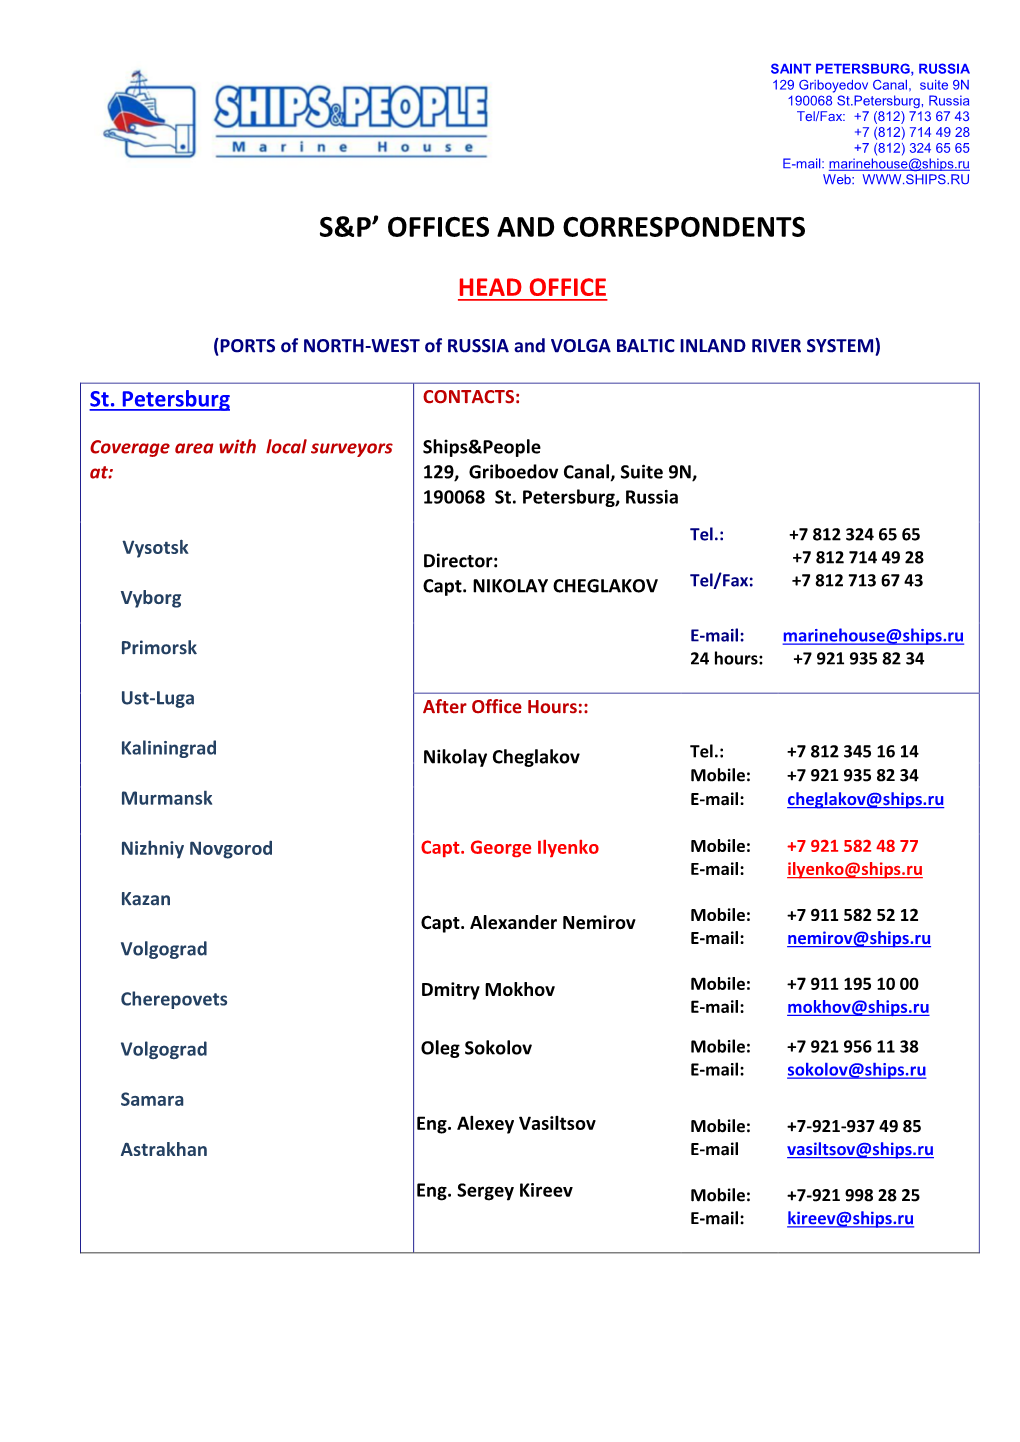 S&P' Offices and Correspondents